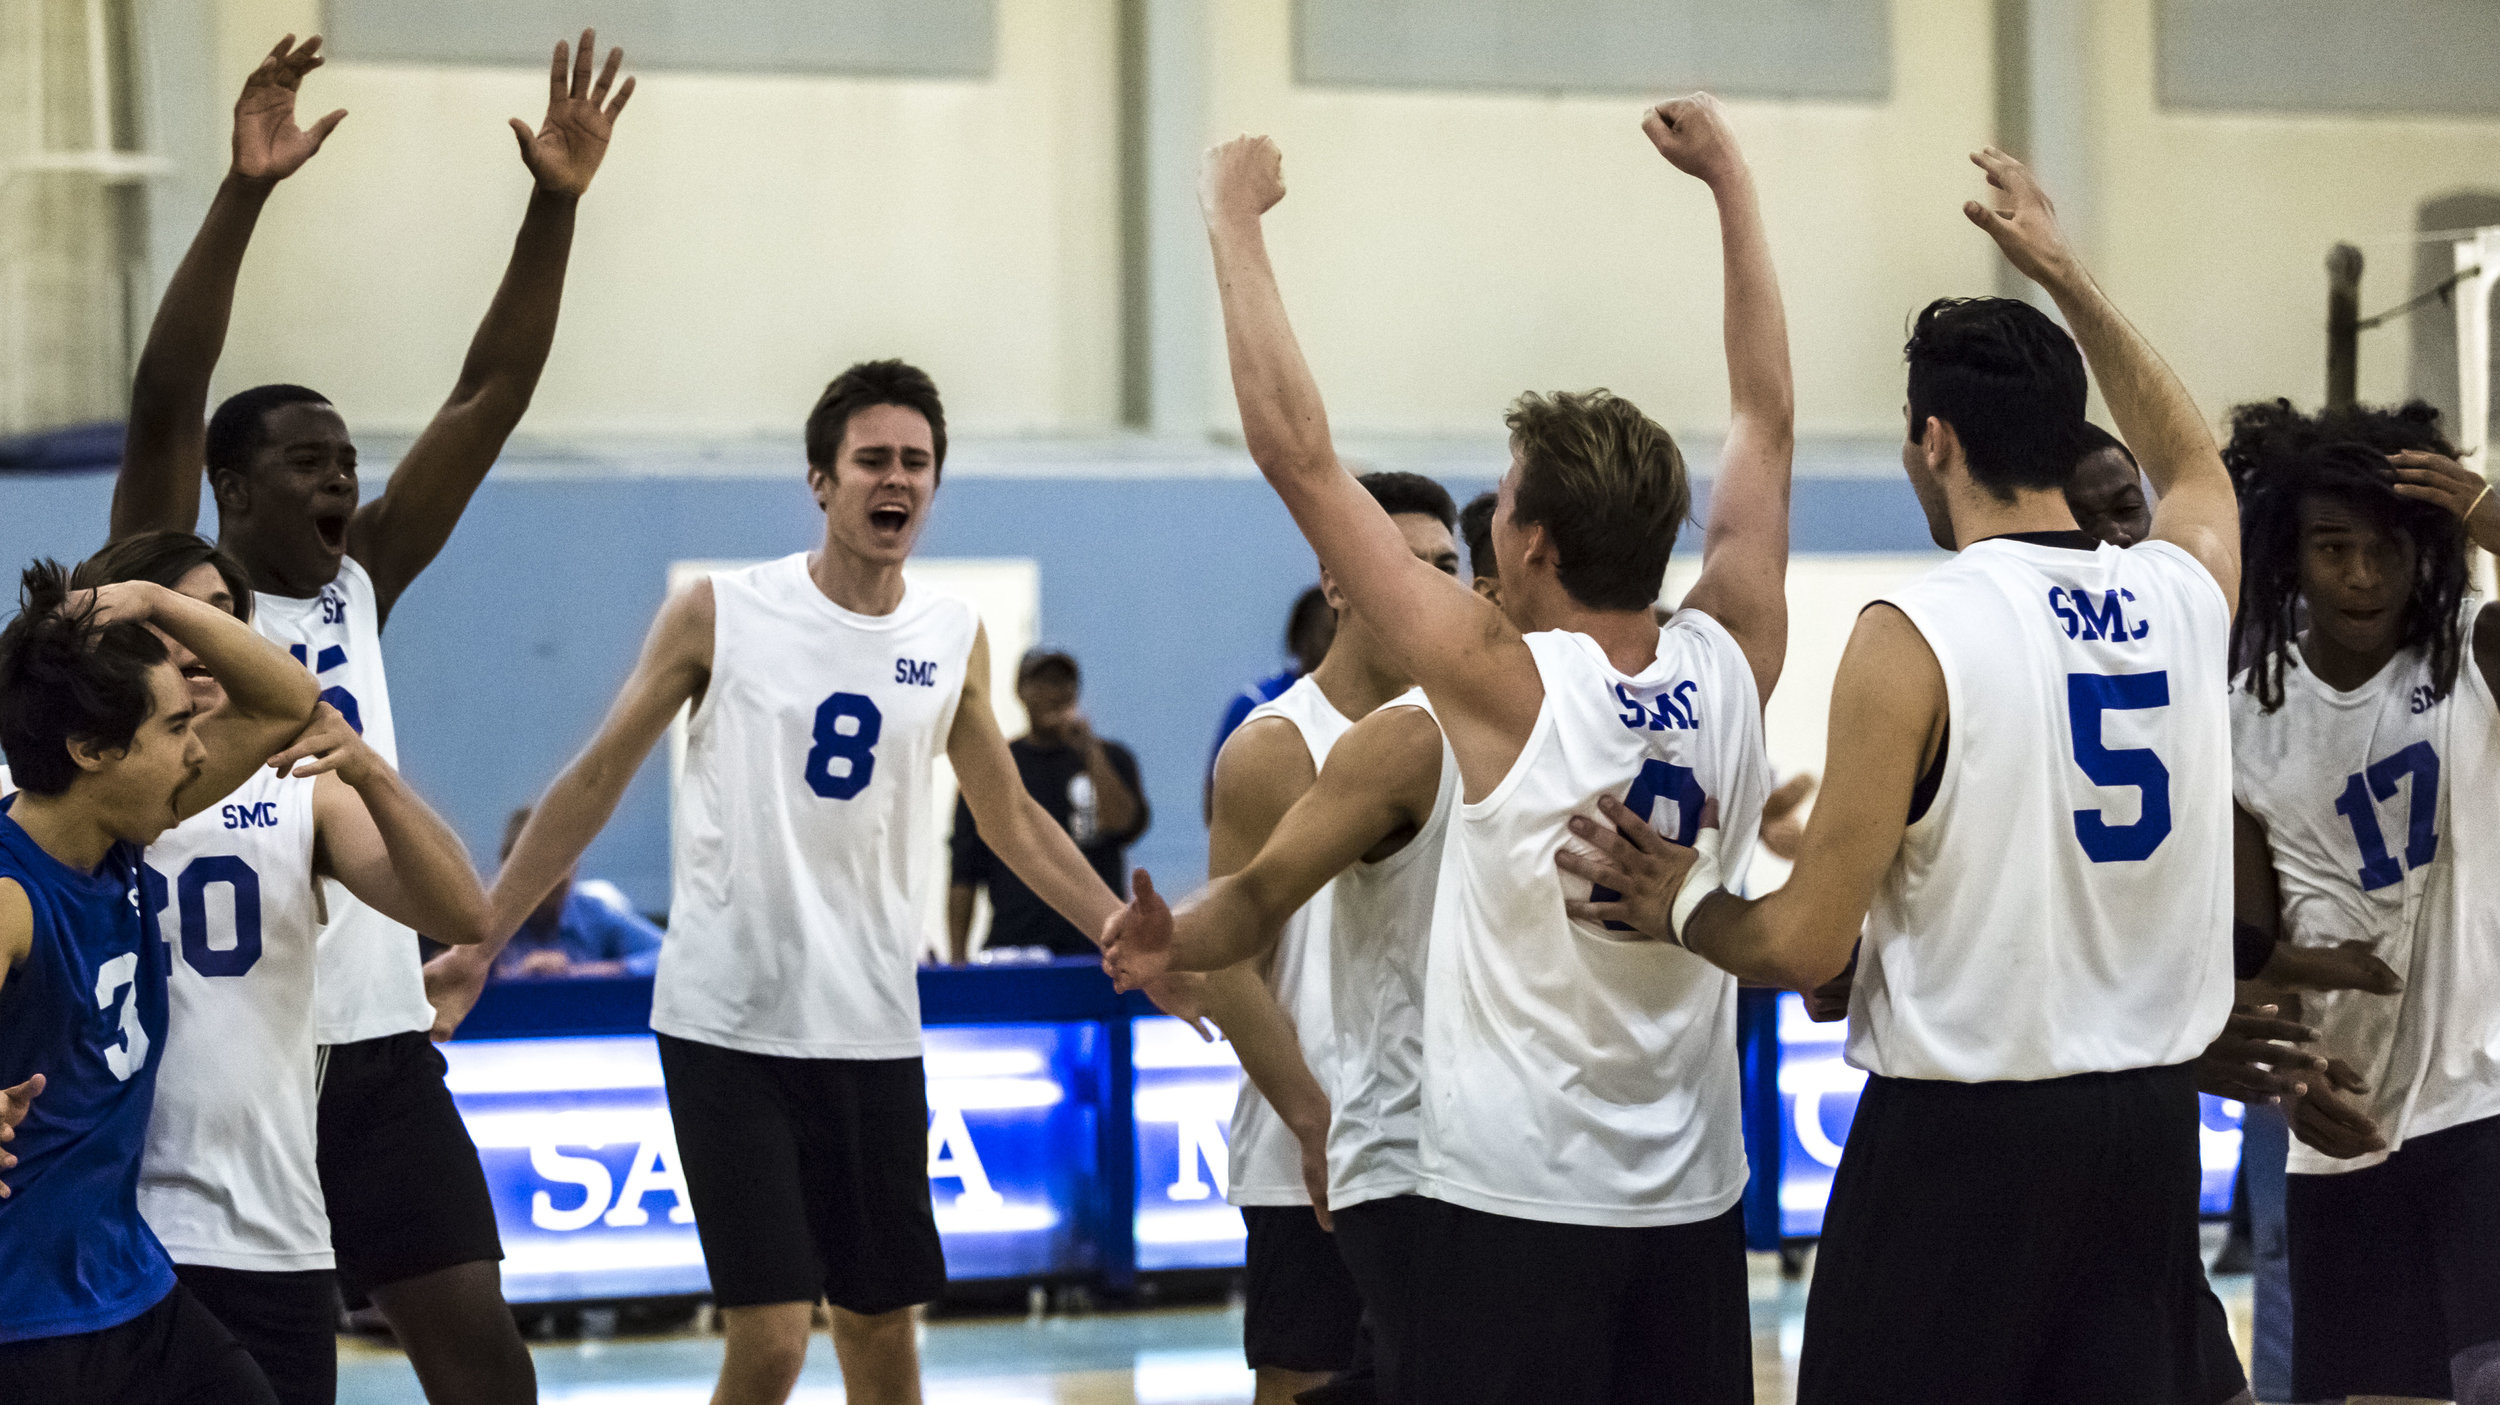  The Santa Monica Corsairs celebrates their match winning point (3-2) against The Pierce College Brahmas in the Santa Monica College gymnasium in Santa Monica Calif., on Friday, April 21 2017. The Corsairs however would go on to win the game 3-2, whi